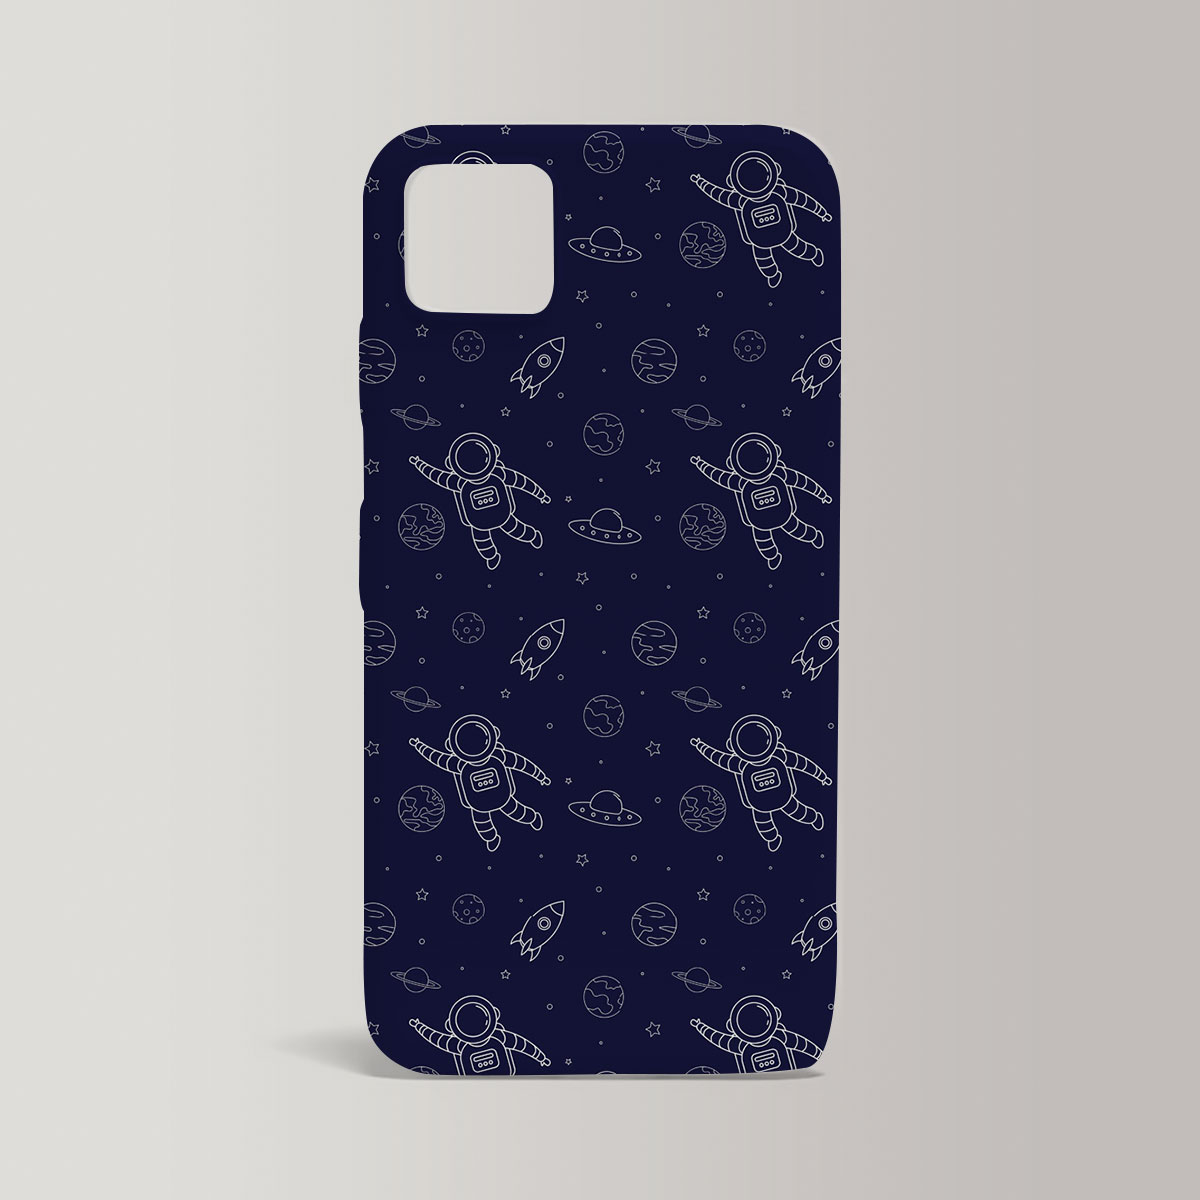 Astronaut And Outer Space Iphone Case